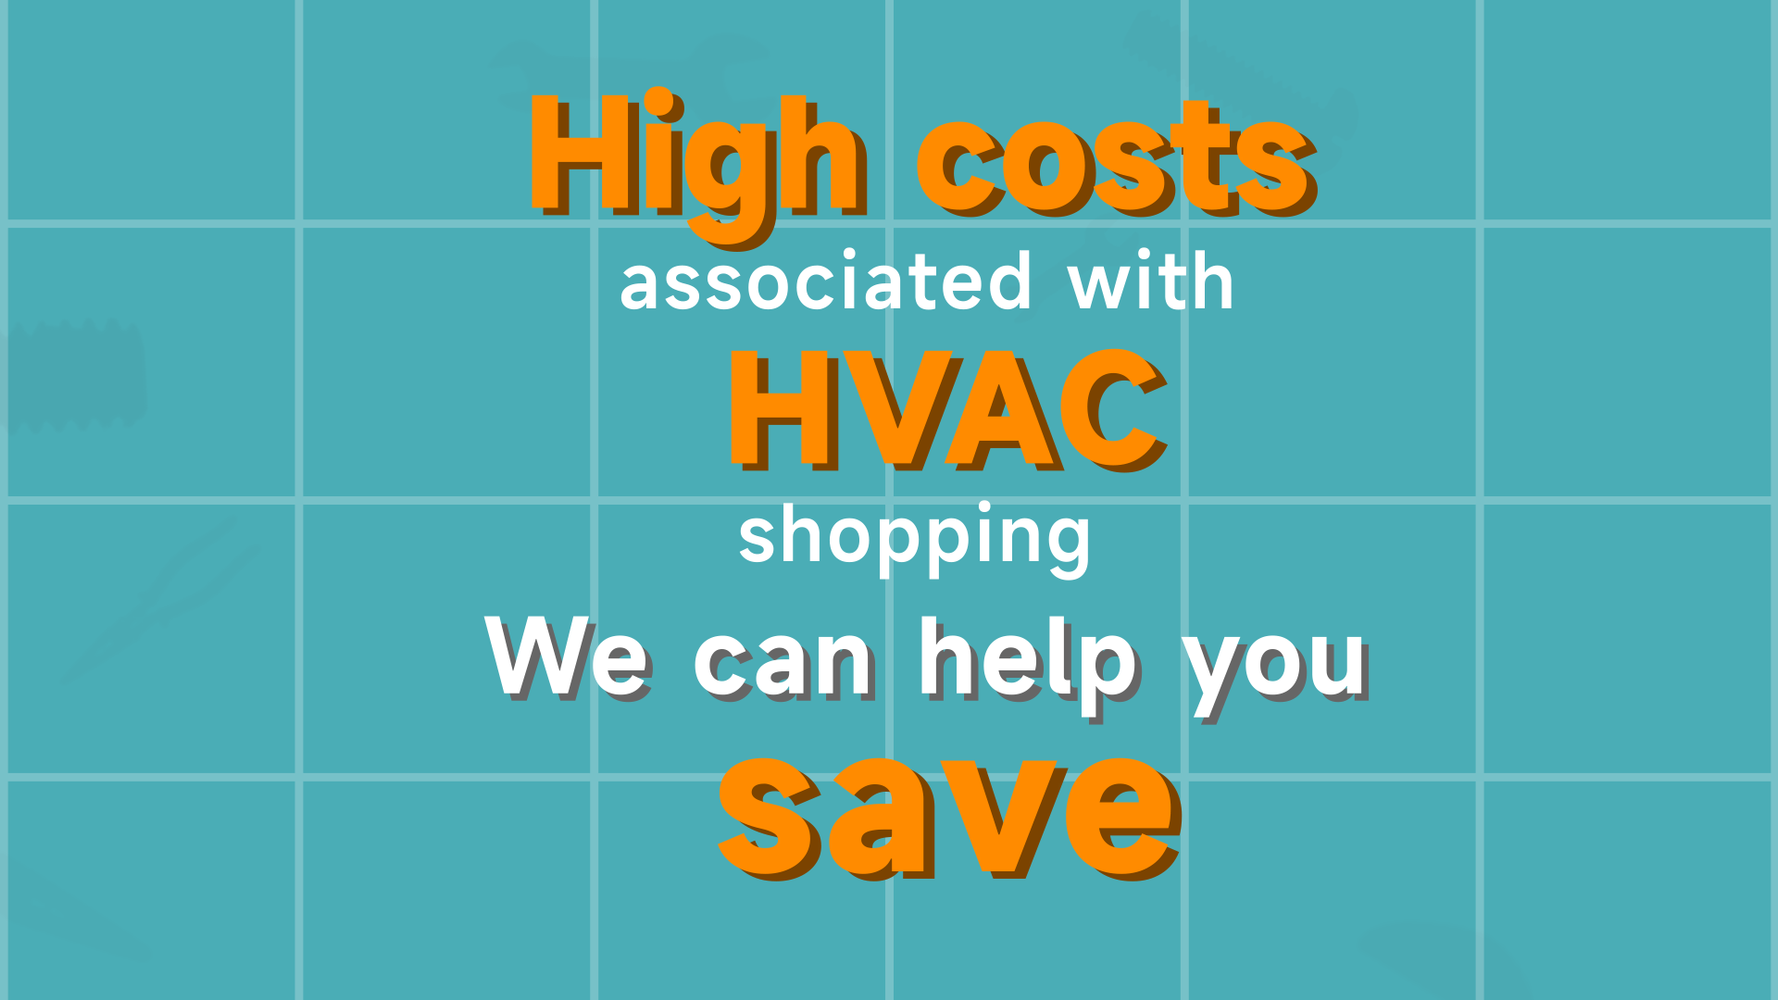 We can help you save costs on HVAC systems.